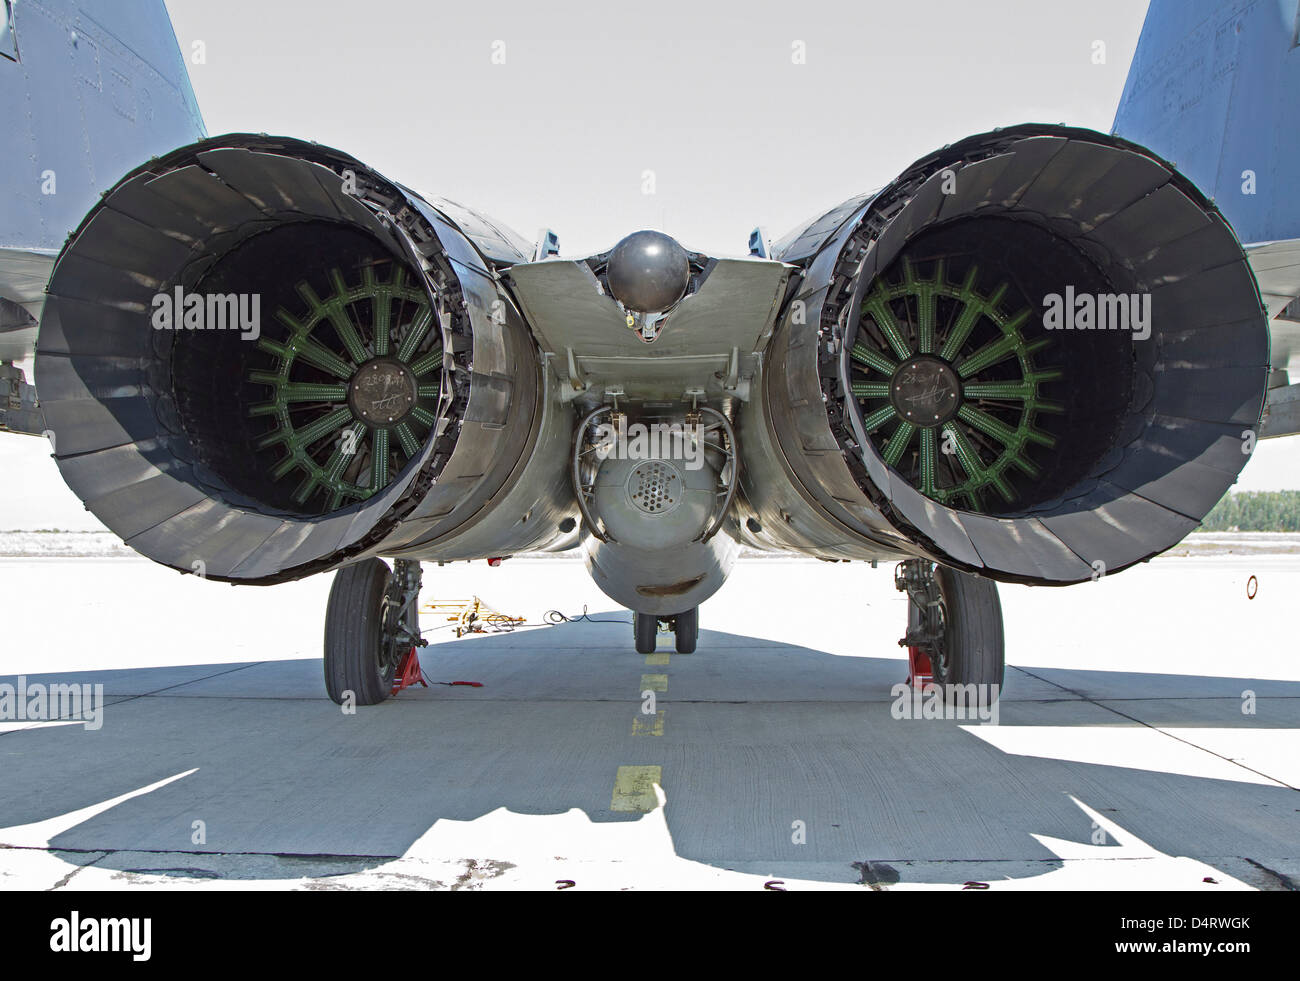 rear-view-of-the-rd-33-engines-on-a-serbian-air-force-mig-29-jet-fighter-D4RWGK.jpg